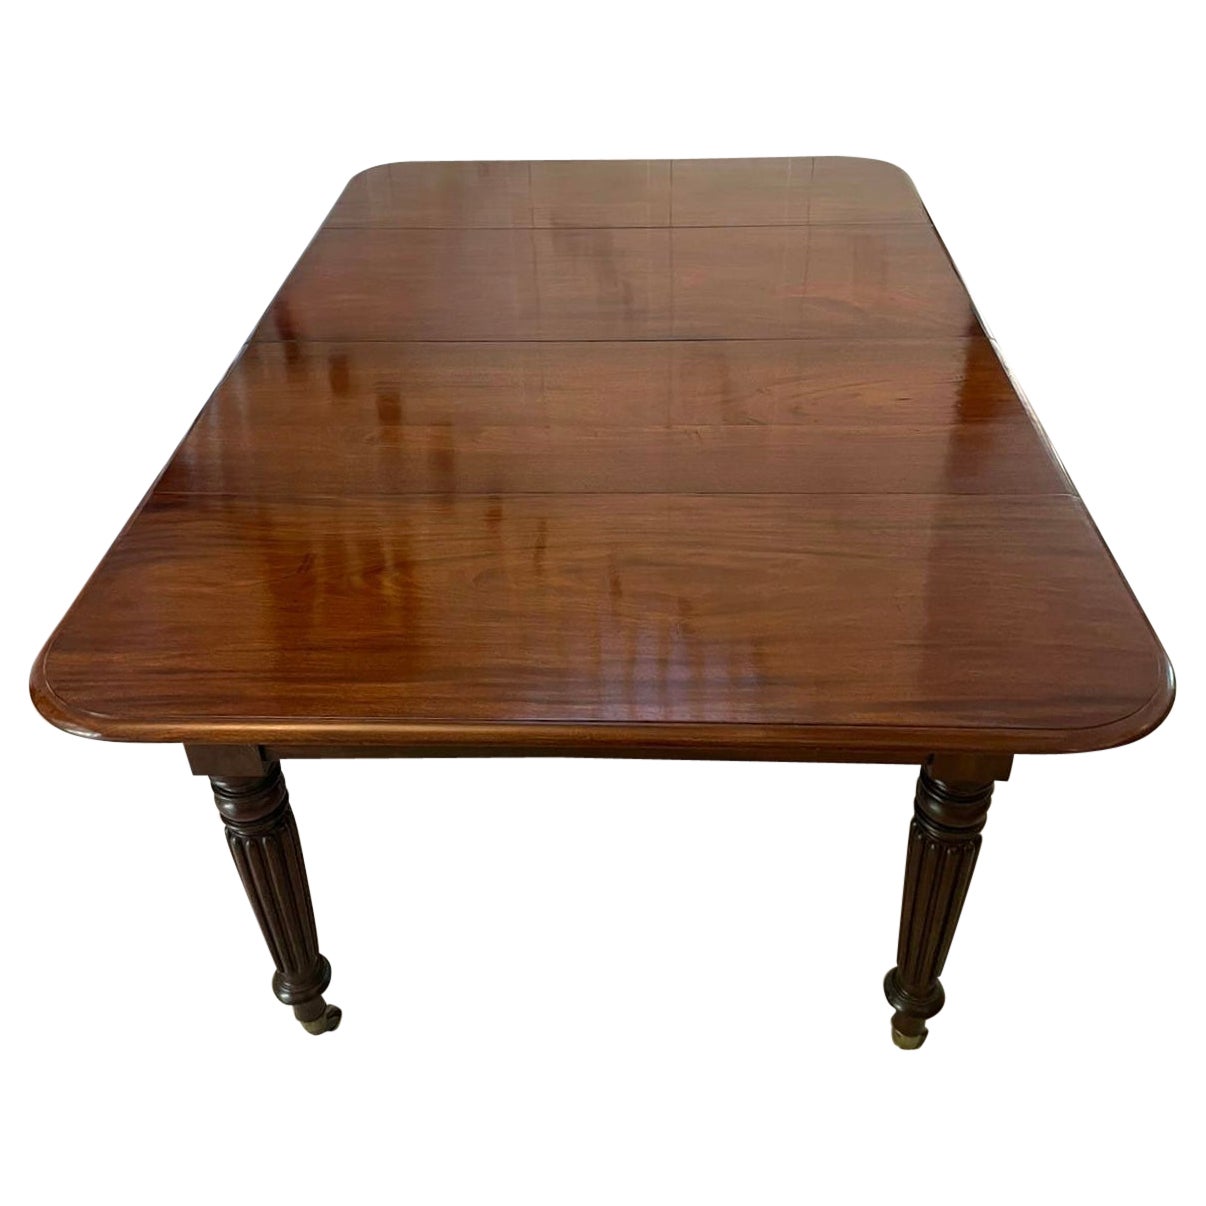 Antique Regency 8 Seater Quality Figured Mahogany Extending Dining Table  For Sale